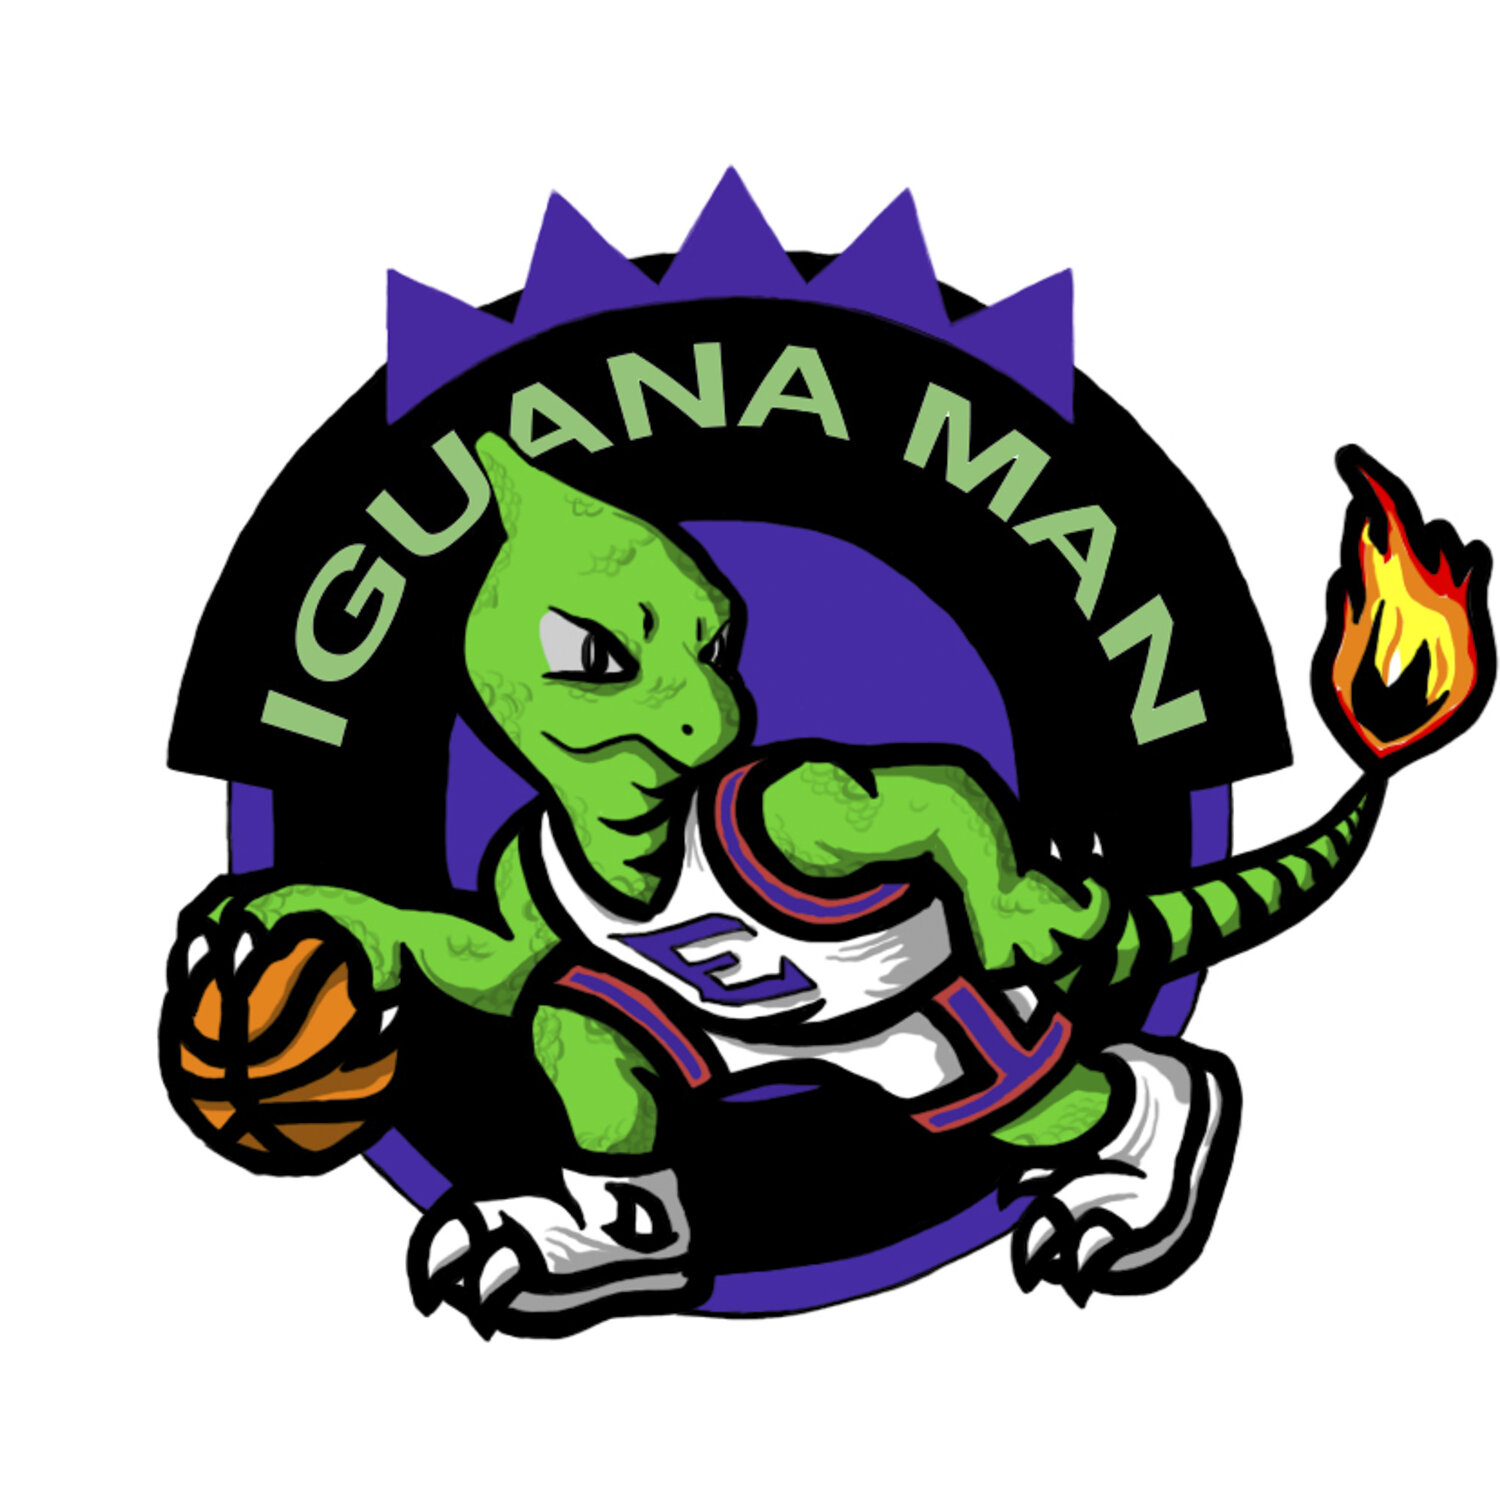 Connect with Iguana Man